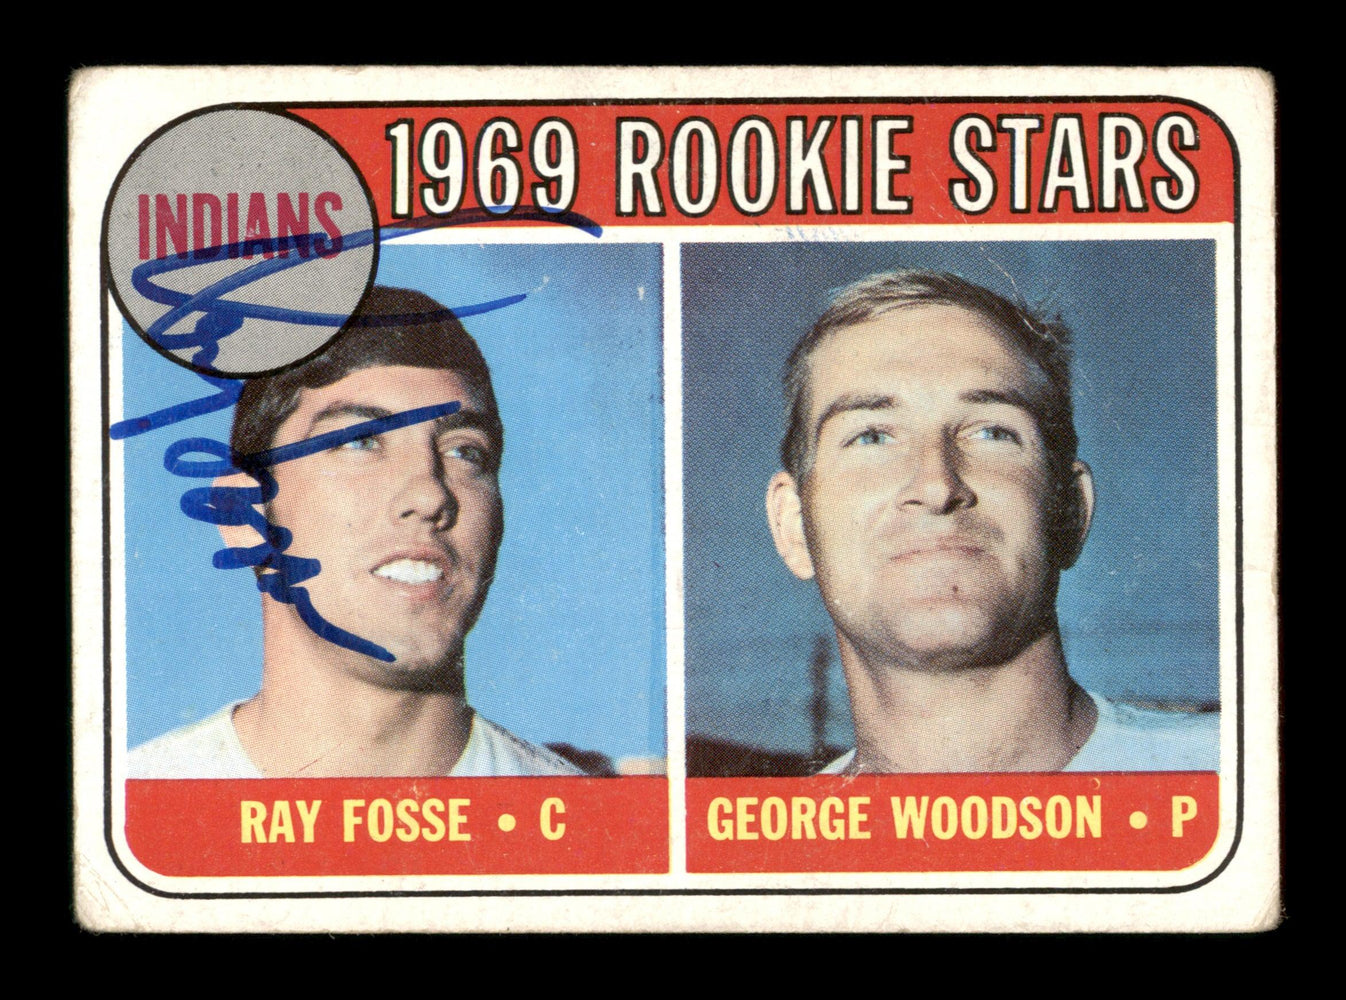 Ray Fosse Autographed 1969 Topps Rookie Card #244 Cleveland Indians SKU #204142 - RSA